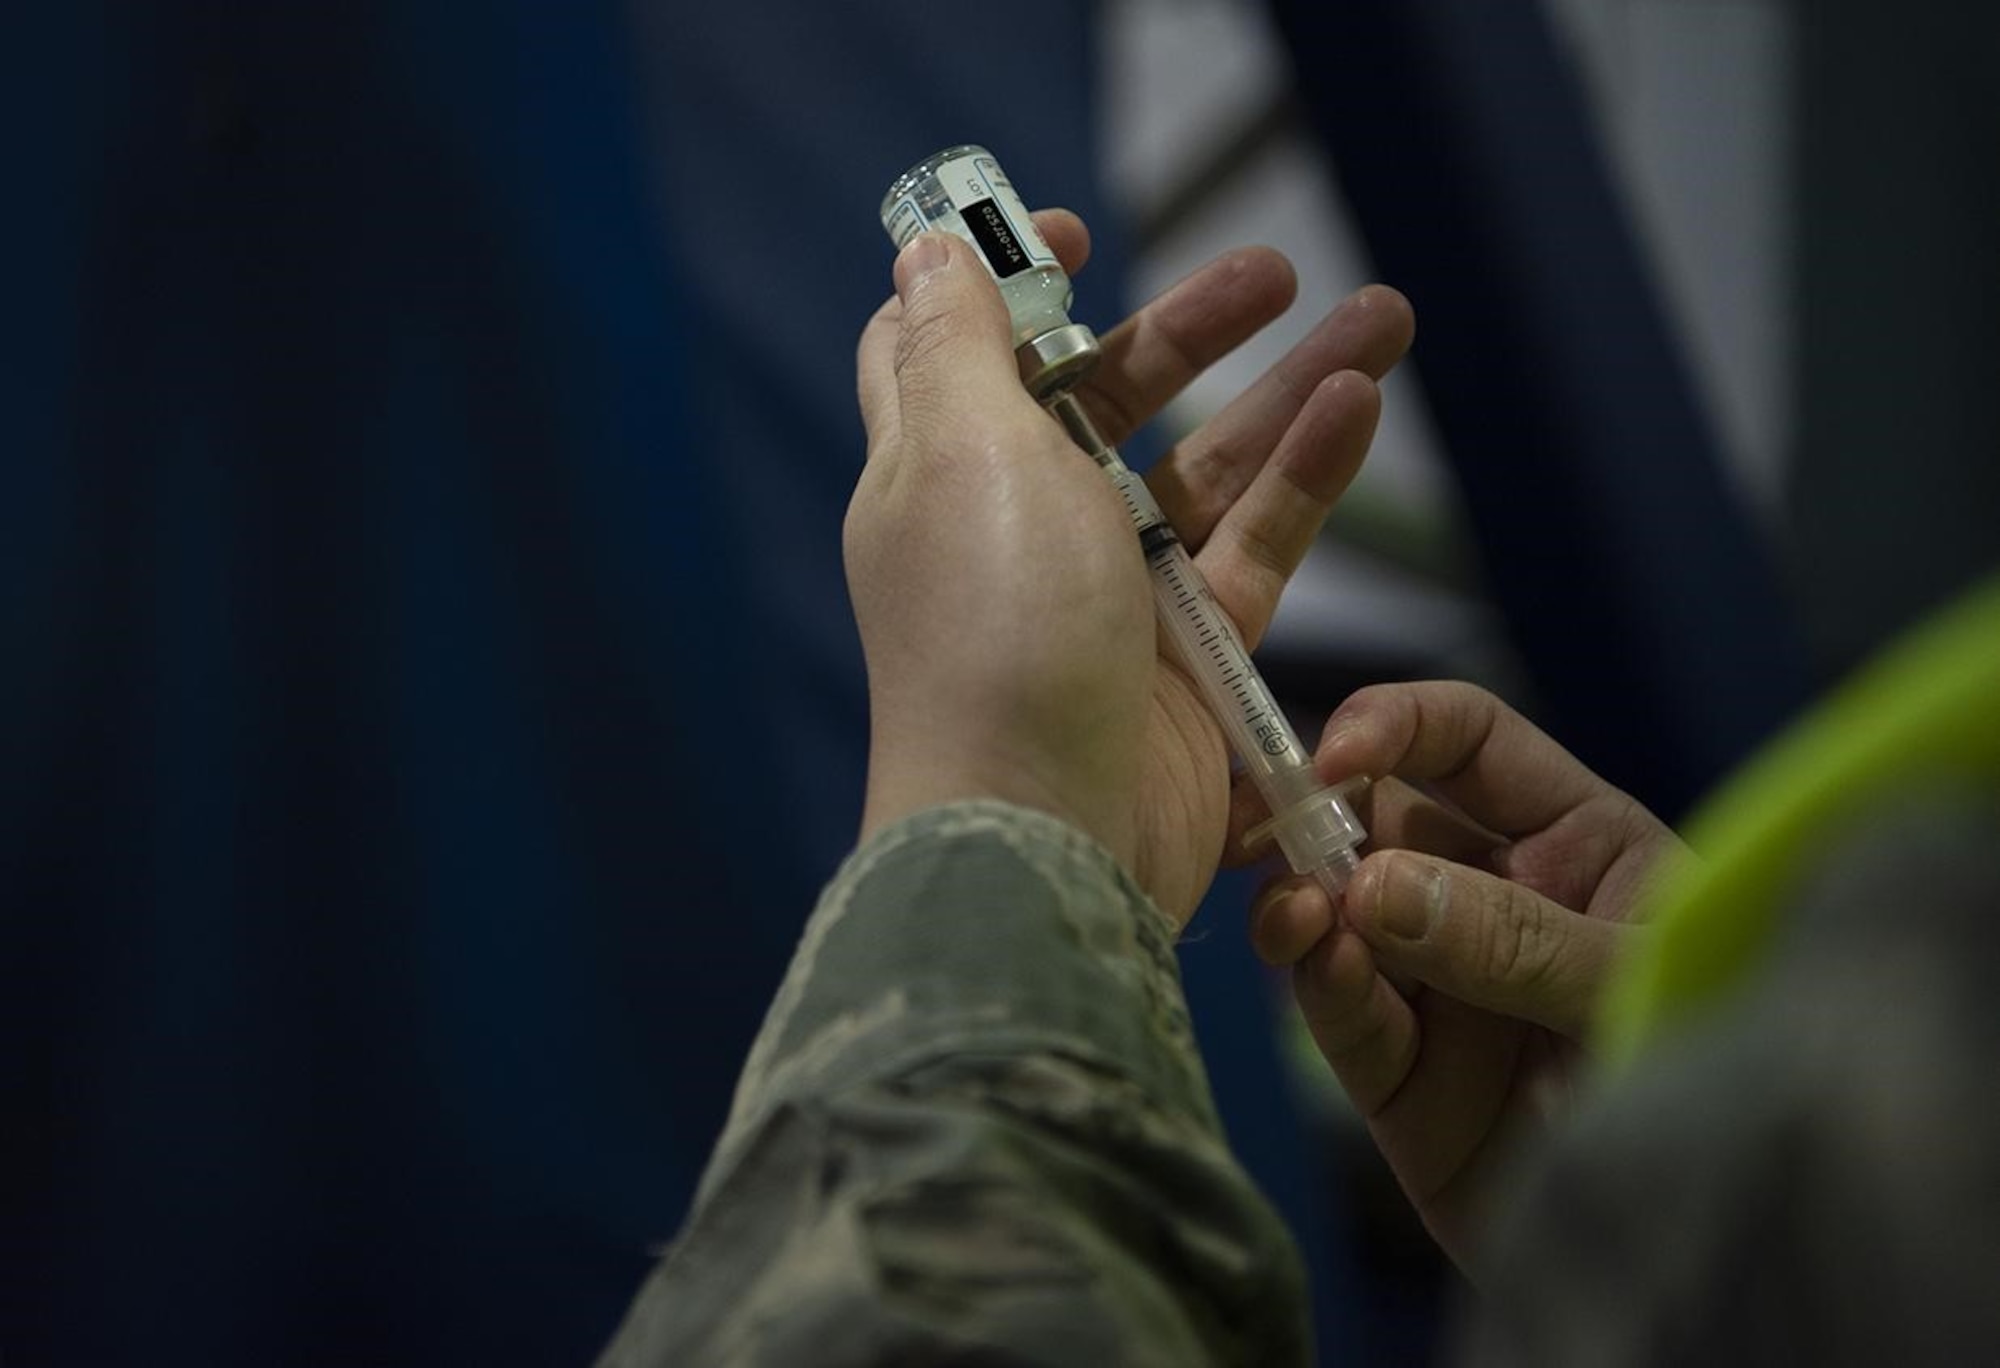 A syringe is prepared with the COVID-19 vaccine at Ramstein Air Base, Germany, Jan. 4, 2021. Health care workers and first responders are the first Airmen eligible to receive the vaccine. The vaccine is administered in two doses, with the second dose given four weeks after the first. (U.S. Air Force photo by Senior Airman Class Jennifer Gonzales)